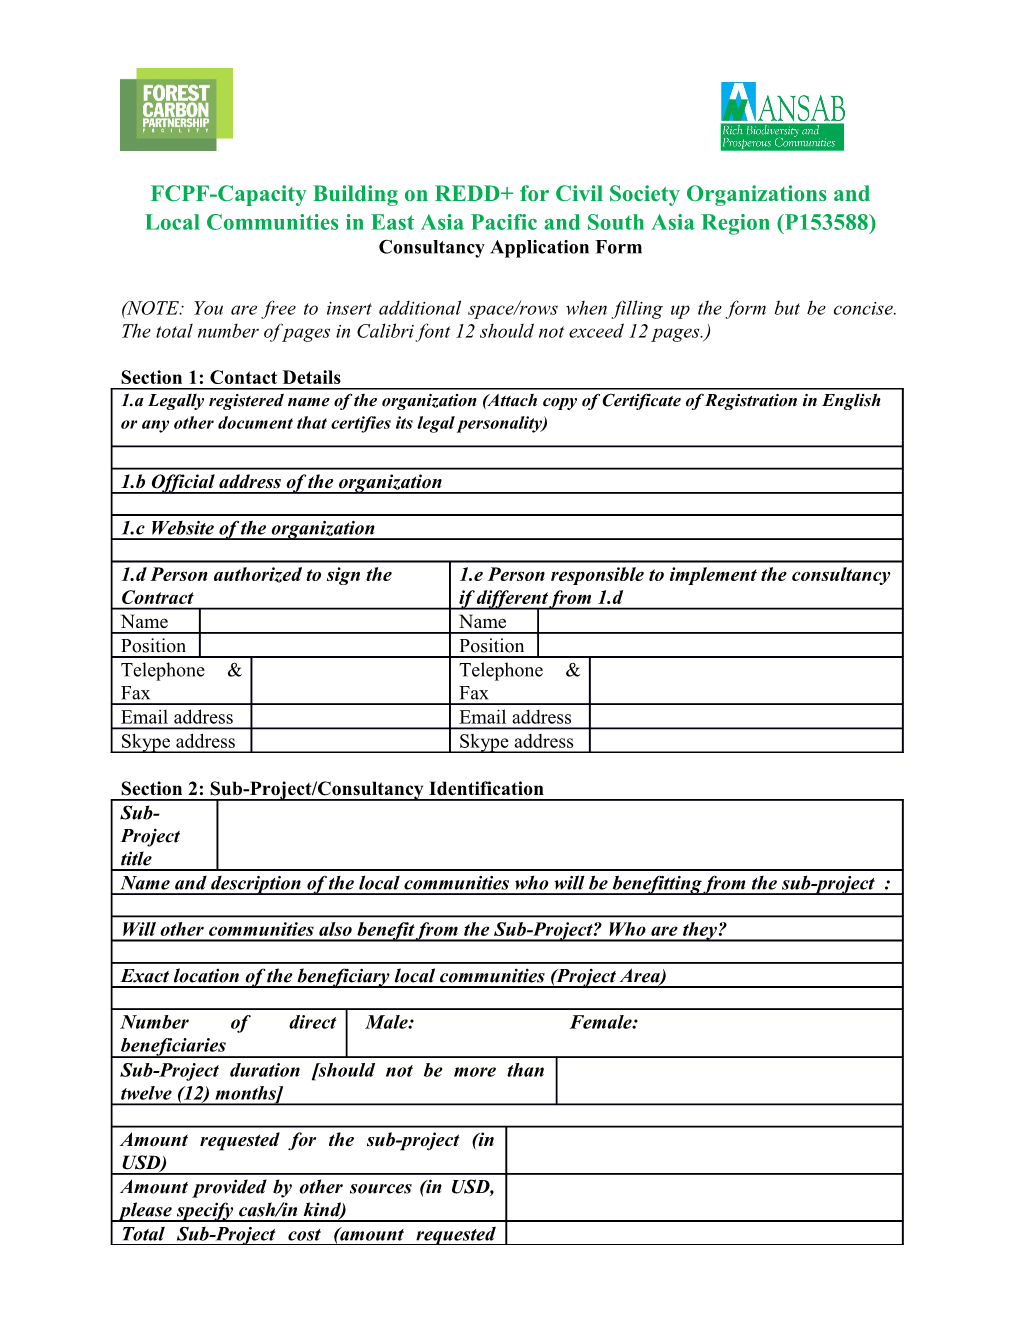 Consultancy Application Form